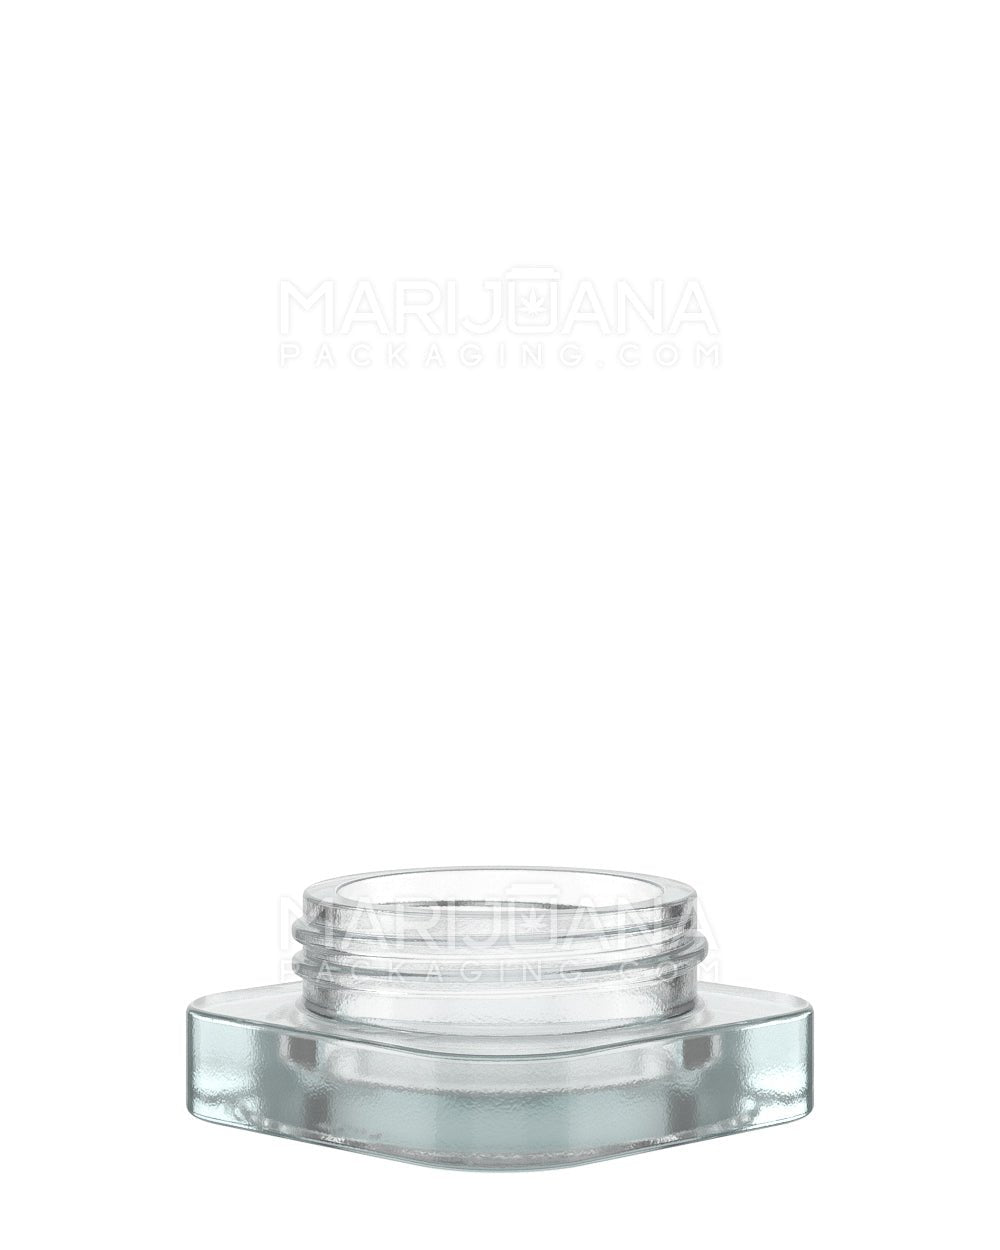 POLLEN GEAR | SoftSquare Clear Glass Concentrate Jar | 38mm - 5mL - 360 Count - 1